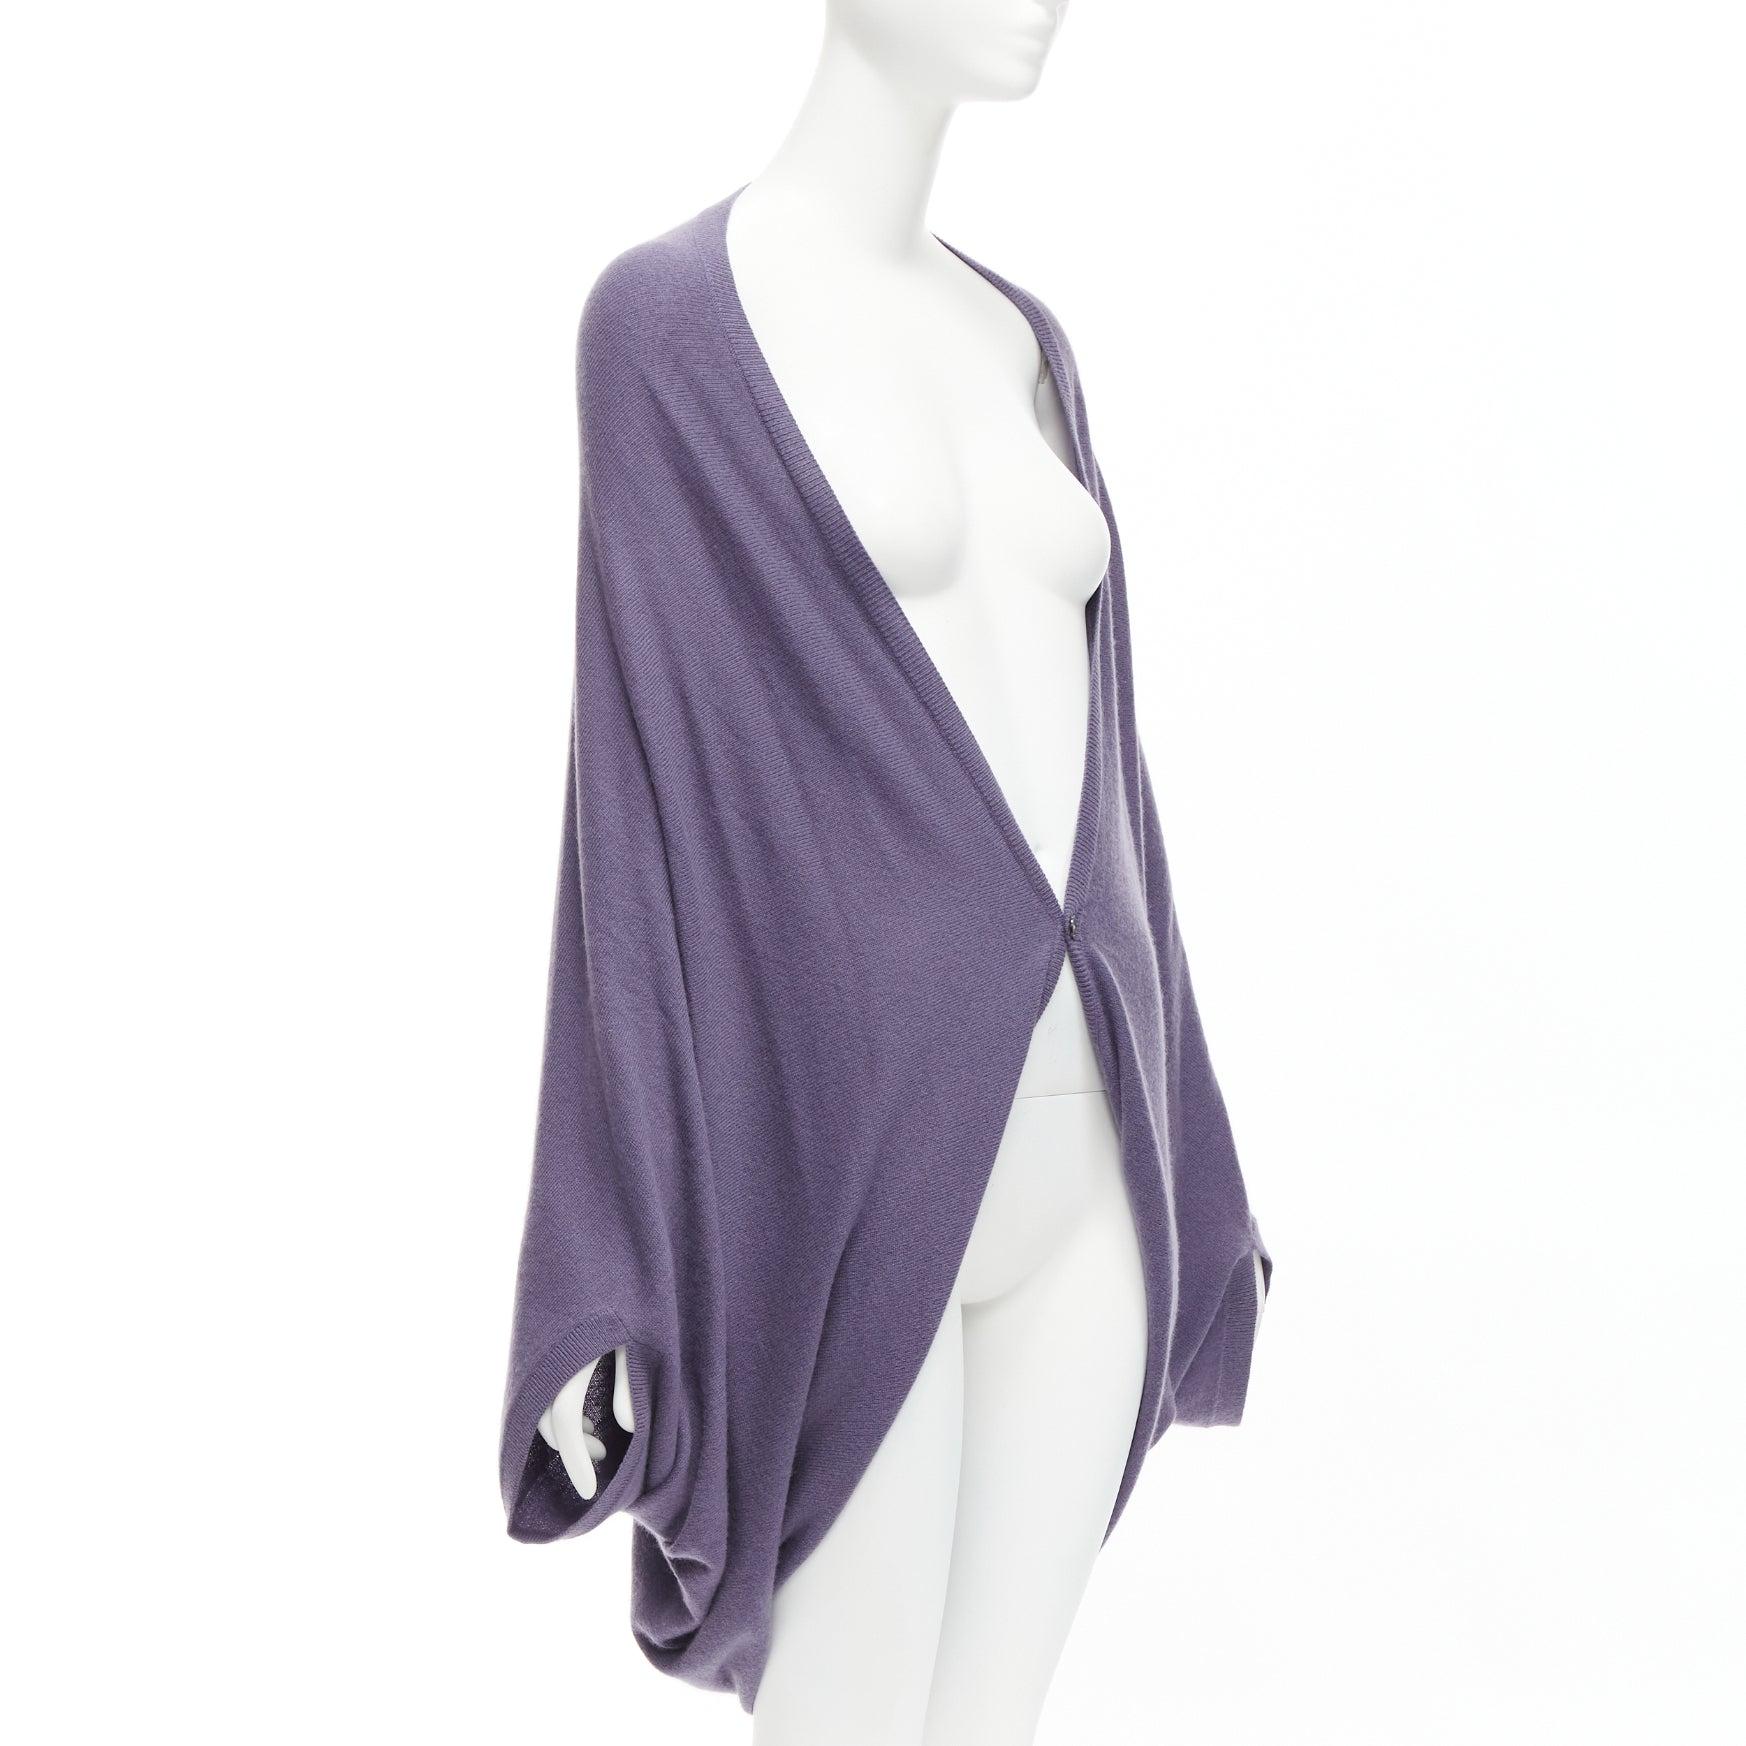 TSE 100% pure cashmere purple low cut batwing shawl cardigan
Reference: DYTG/A00057
Brand: Tse
Material: Cashmere
Color: Purple
Pattern: Solid
Closure: Button

CONDITION:
Condition: Excellent, this item was pre-owned and is in excellent condition.